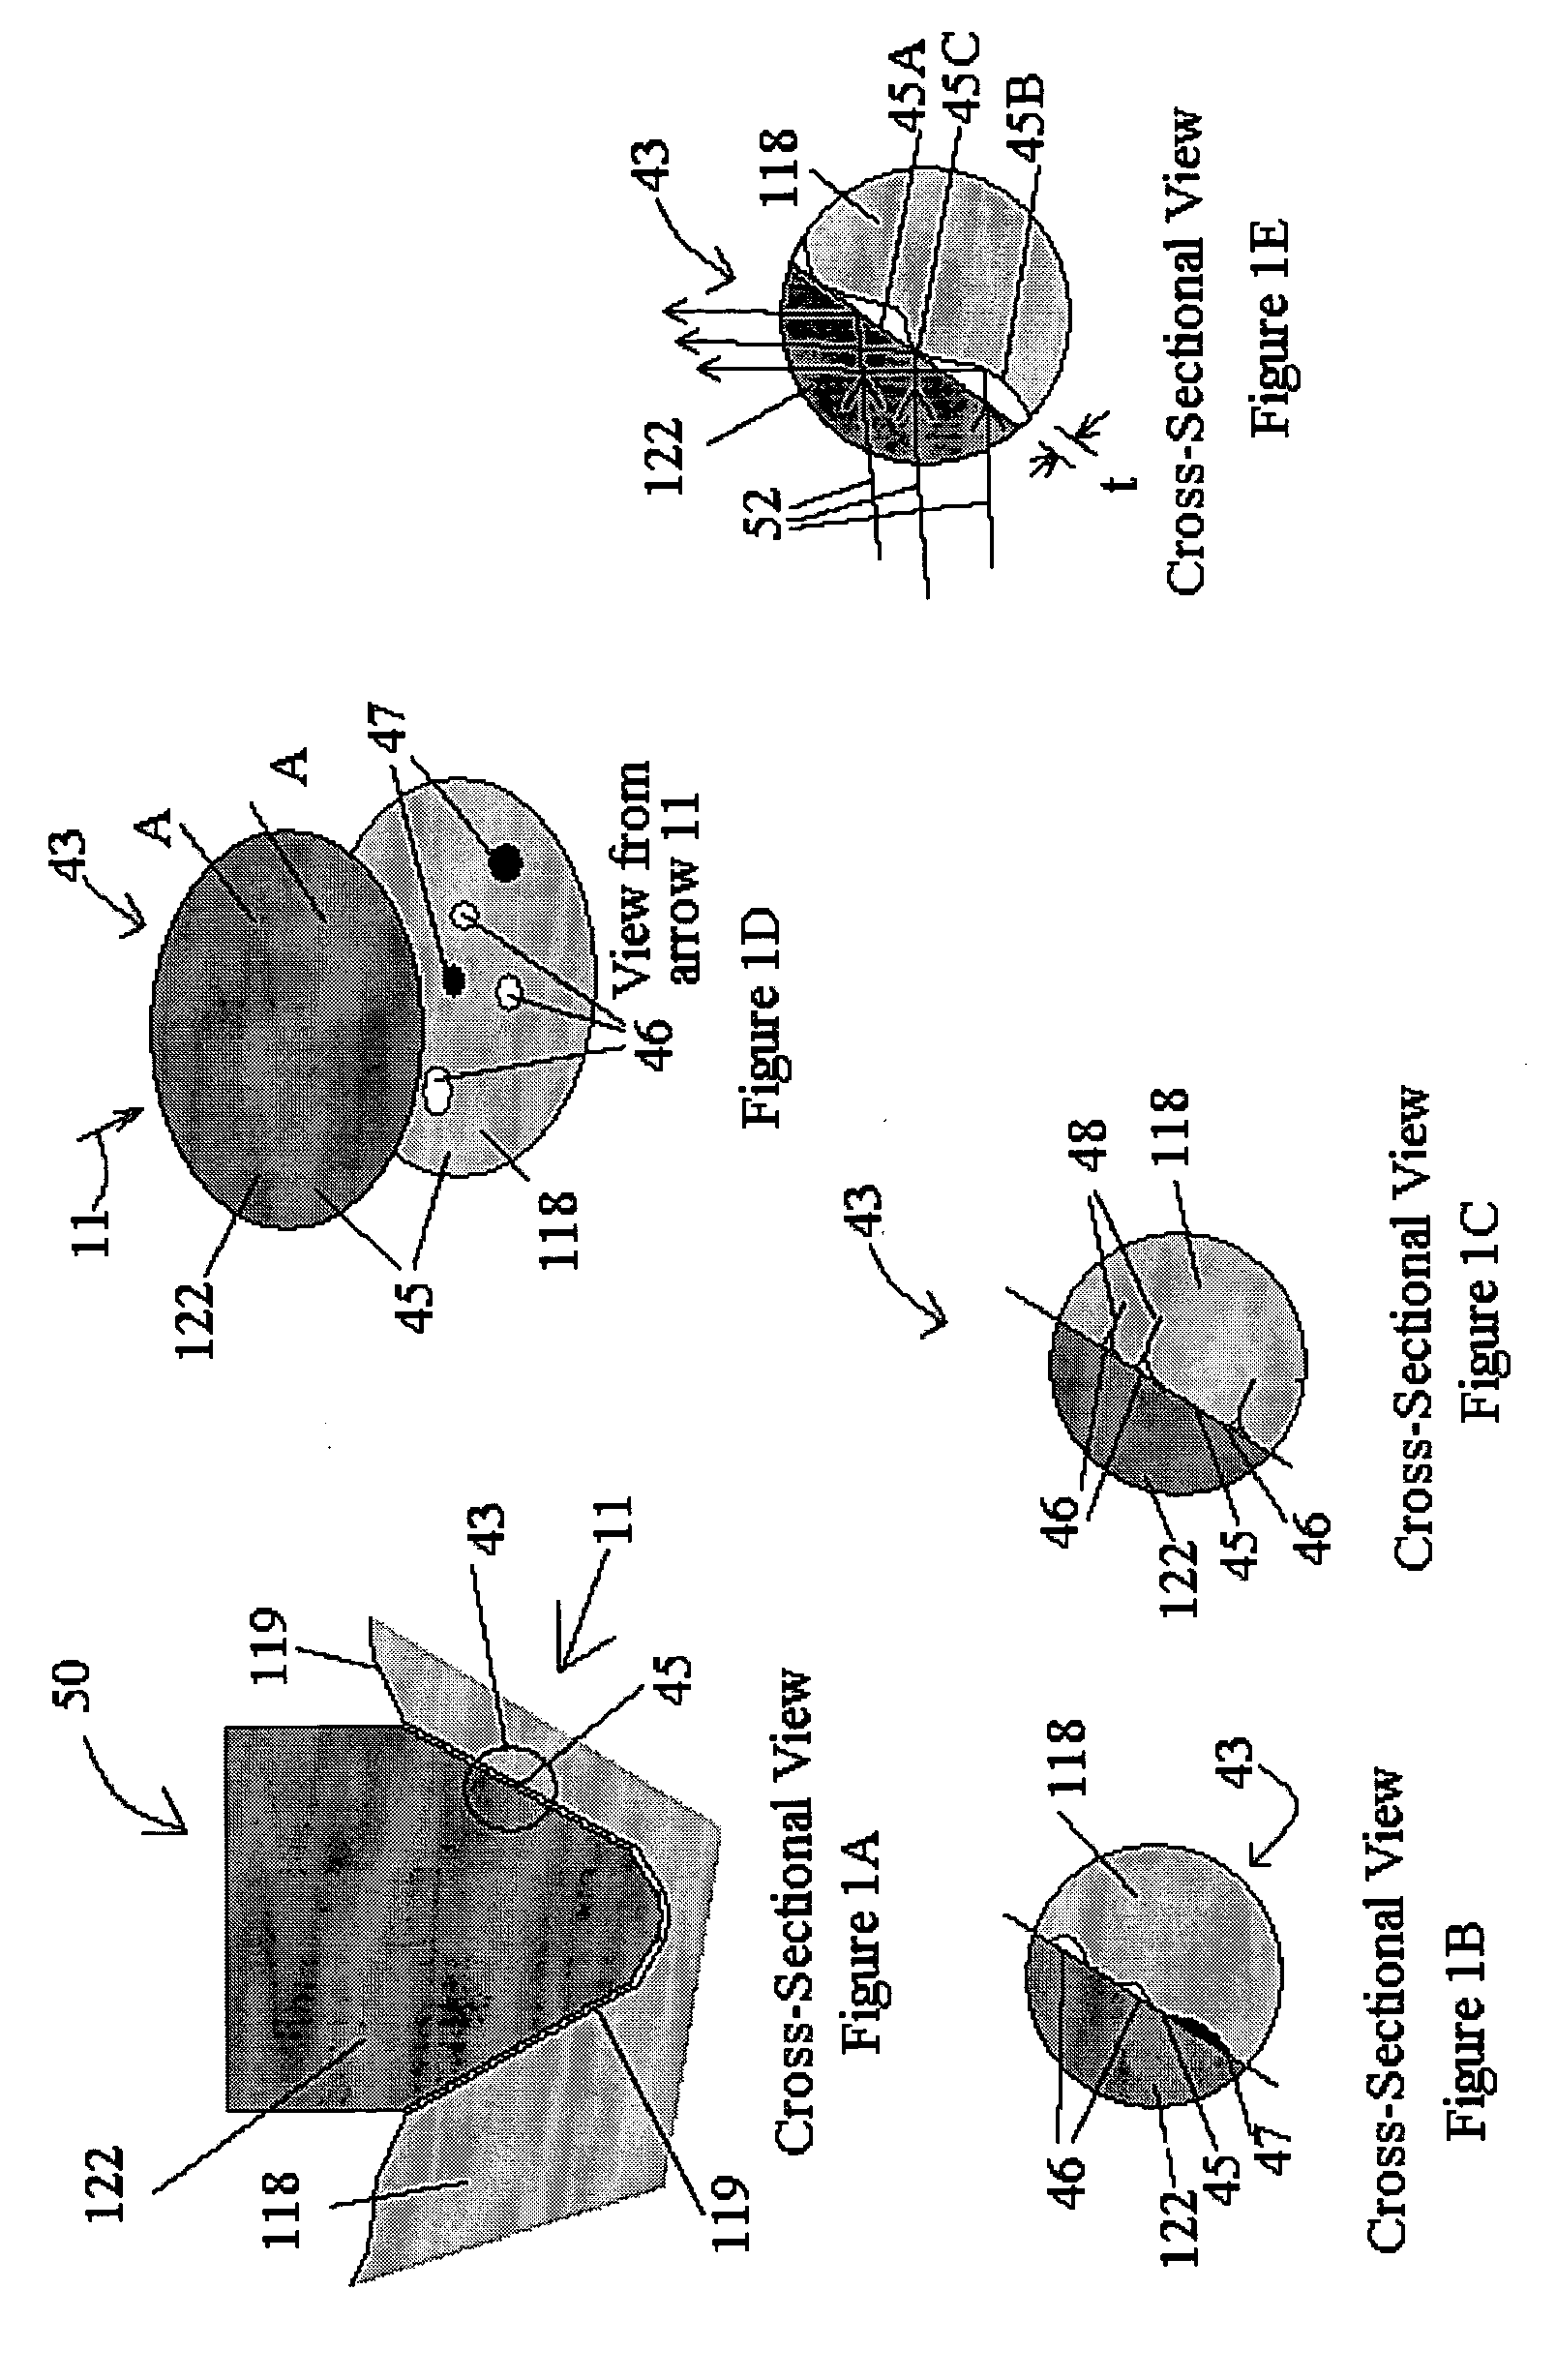 Device for forming an effective sensor-to-tissue contact